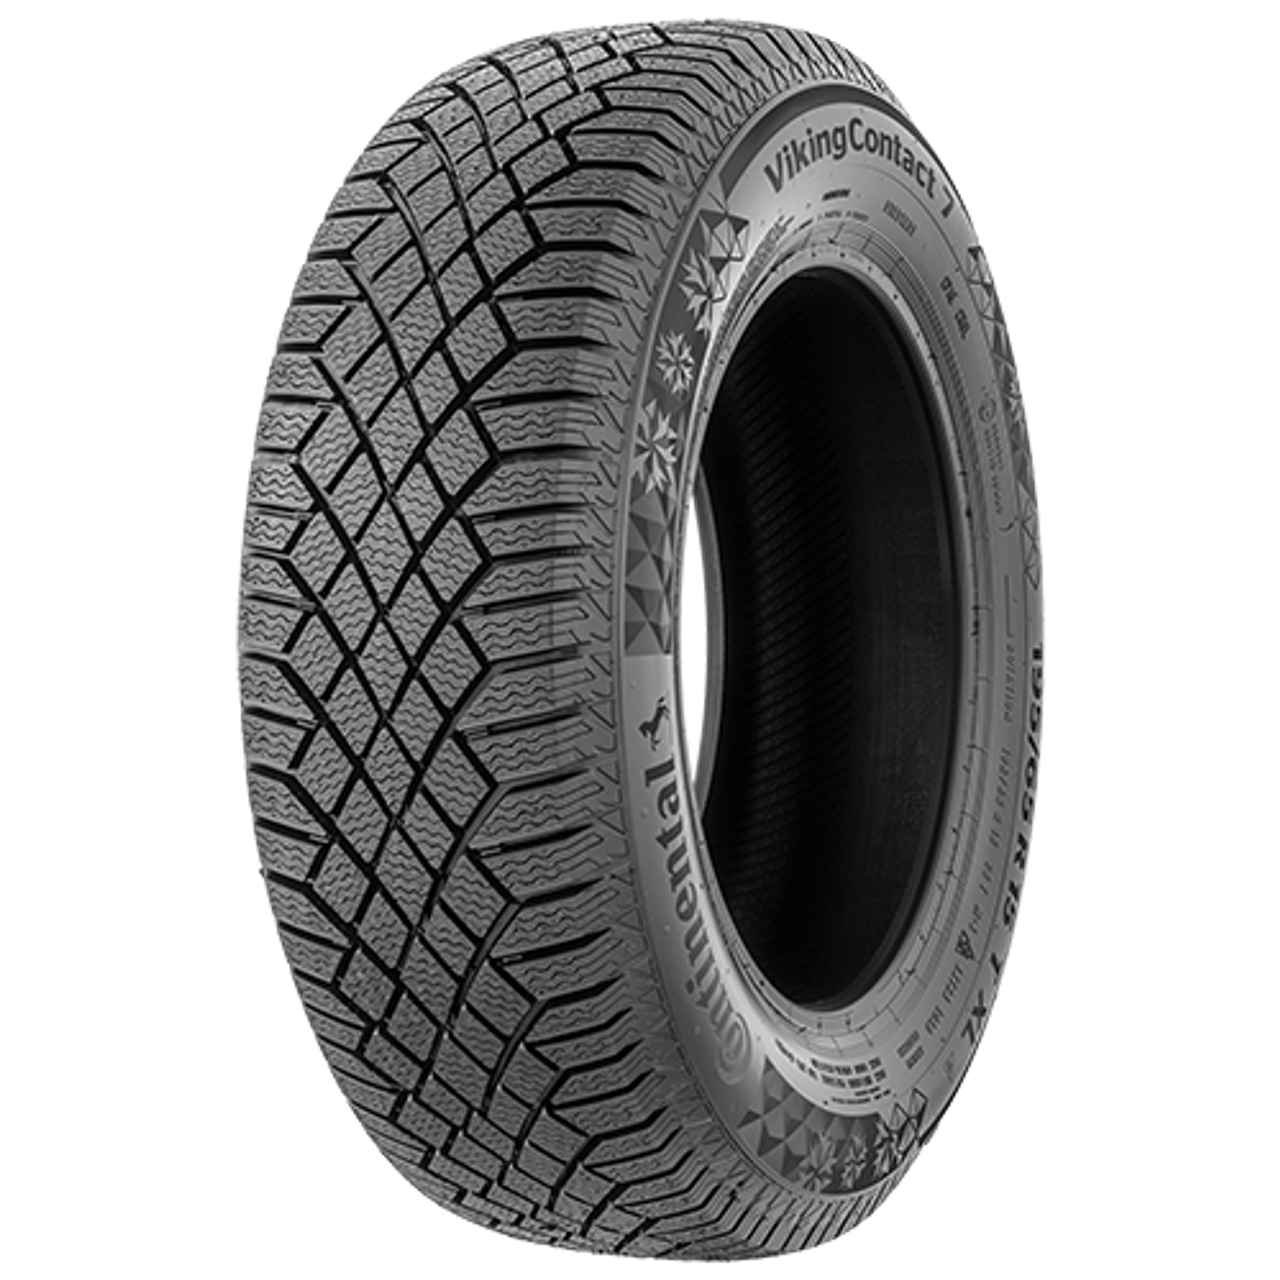 CONTINENTAL VIKINGCONTACT 7 225/45R17 94T NORDIC COMPOUND FR BSW XL